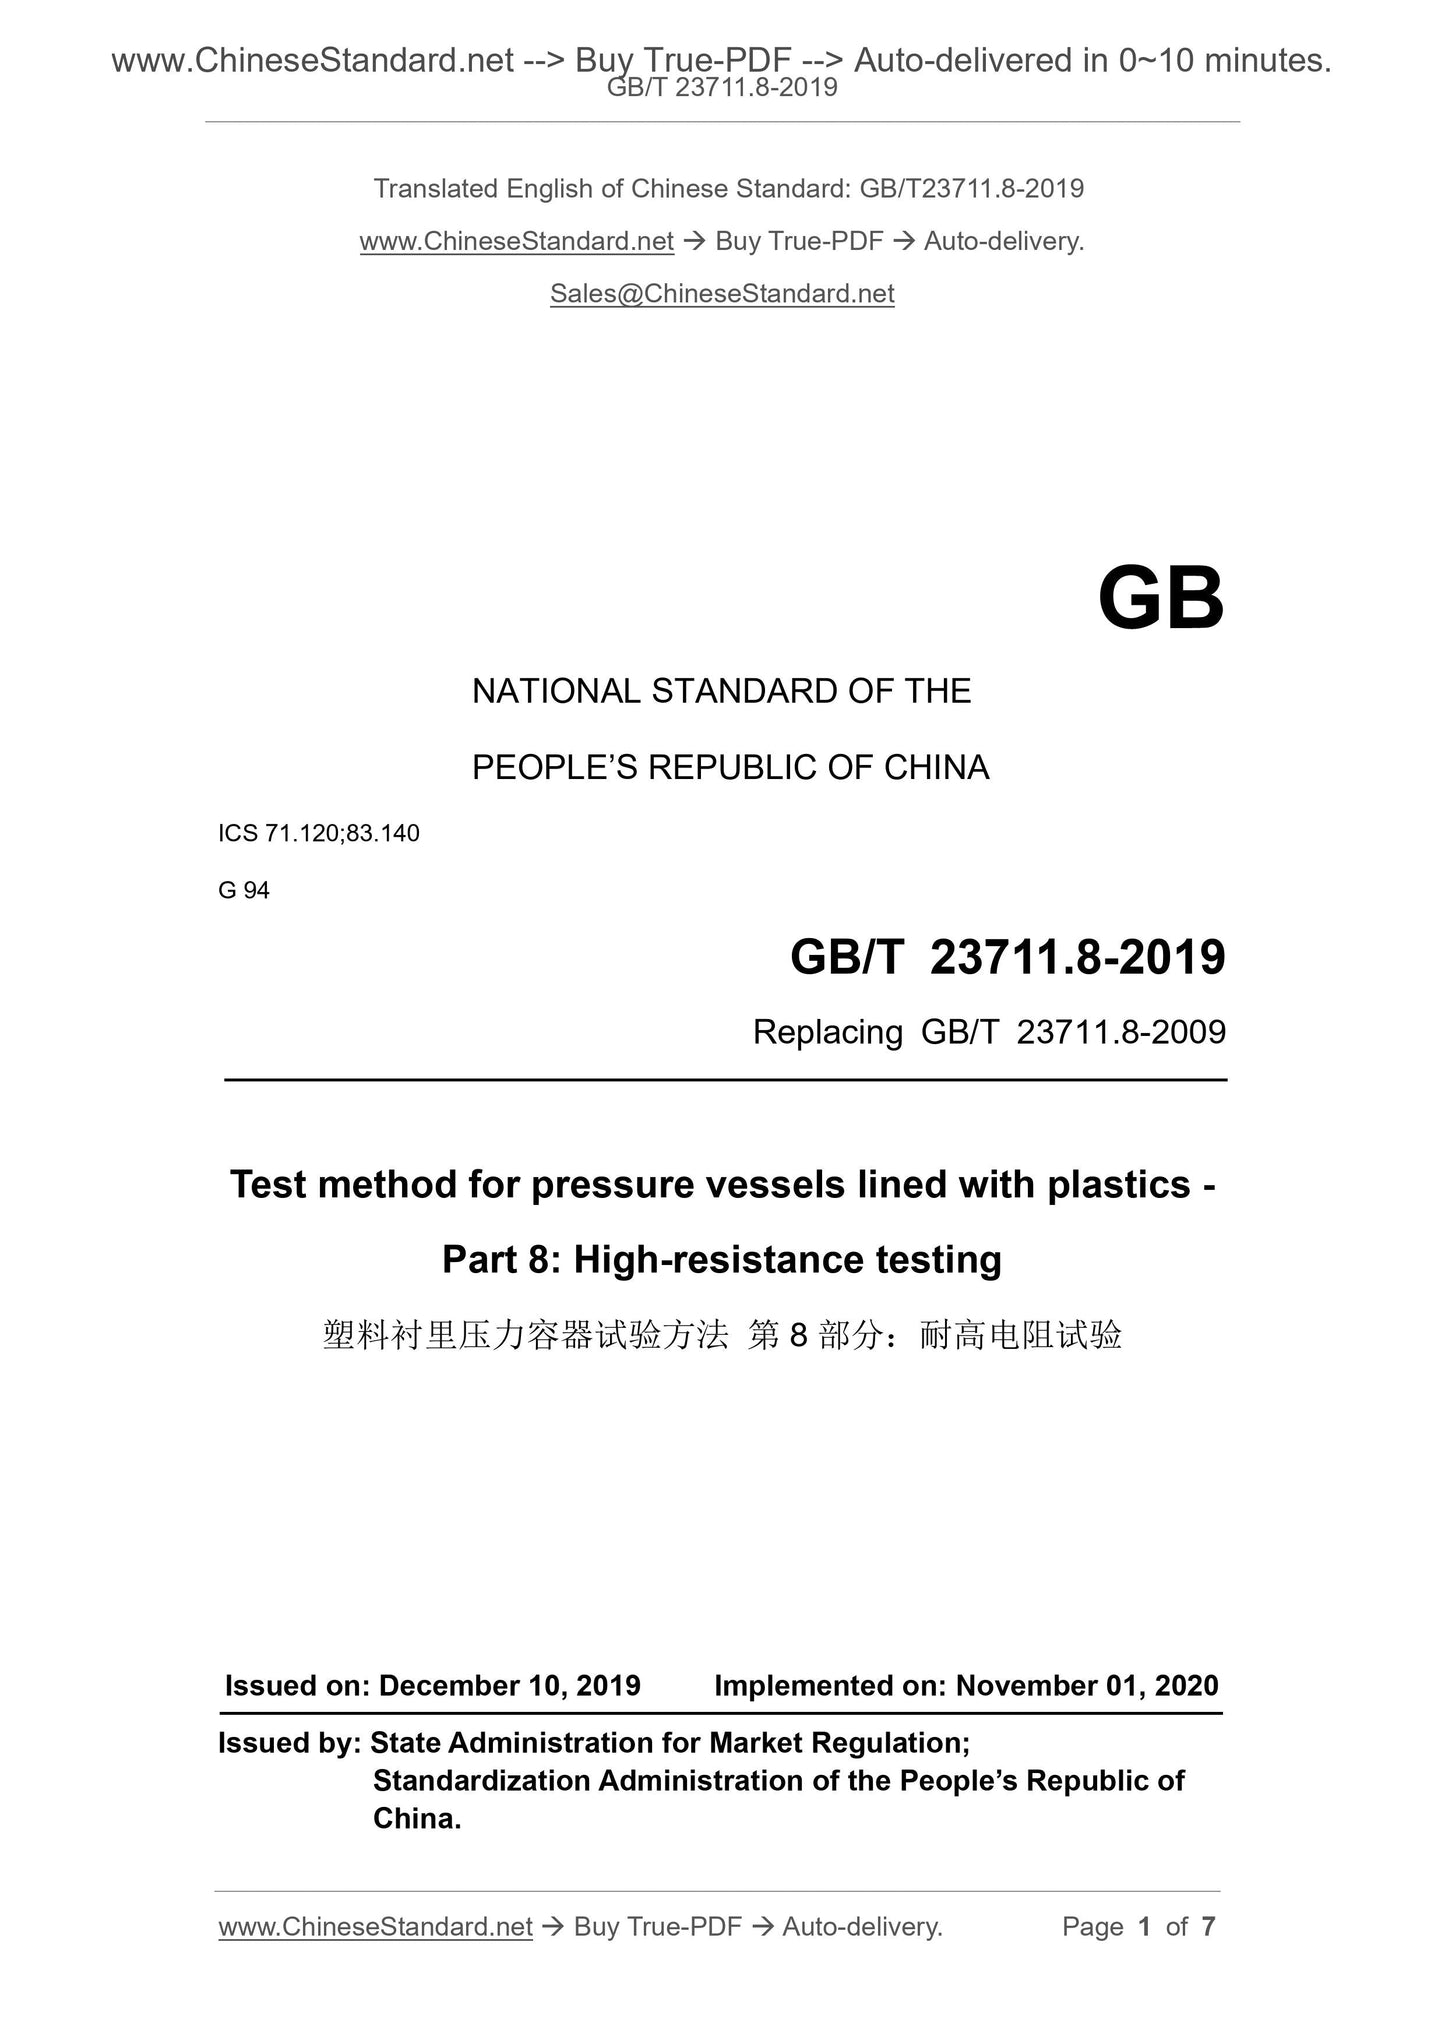 GB/T 23711.8-2019 Page 1